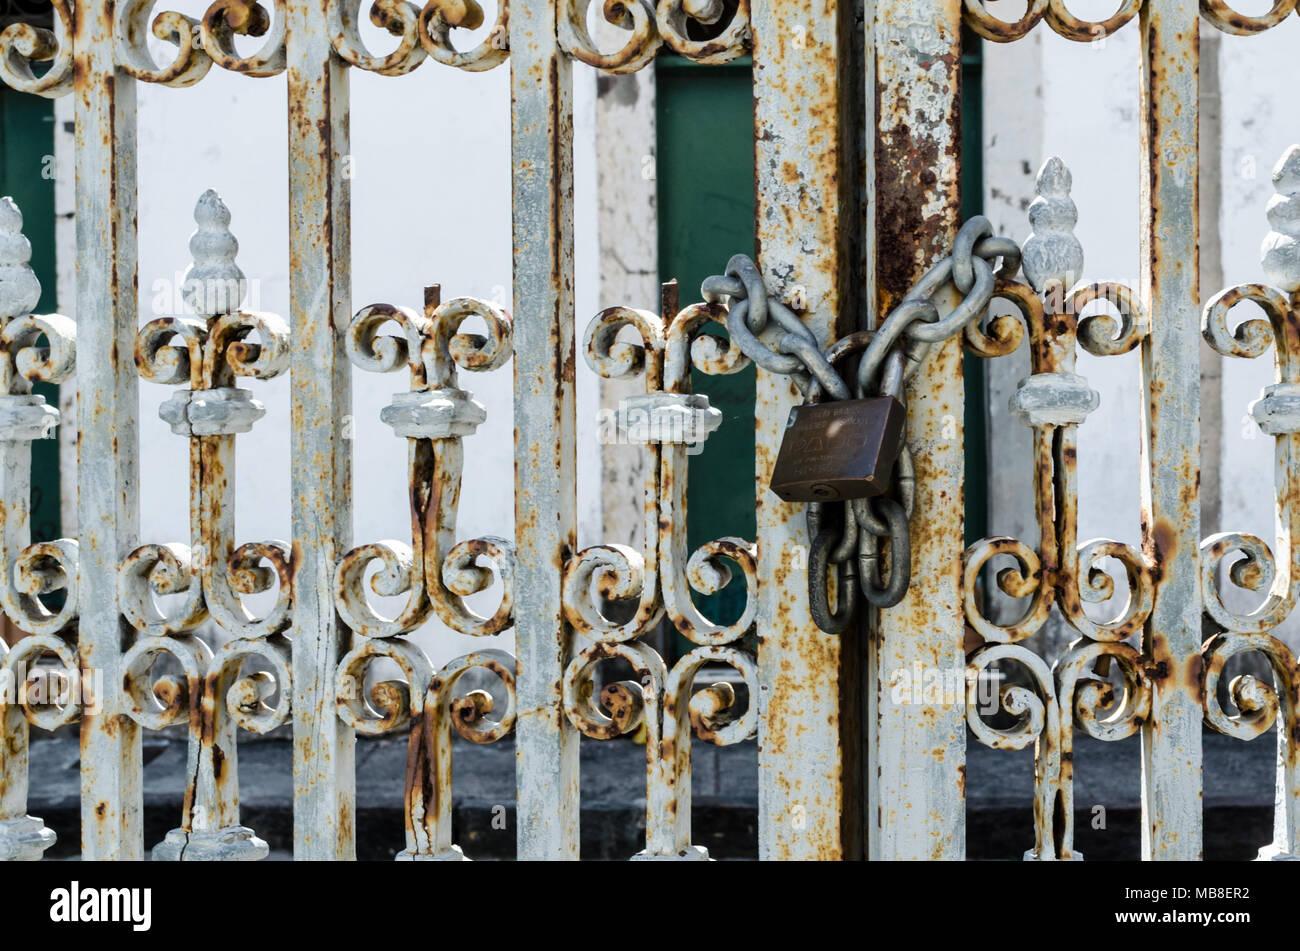 Rusty iron door with padlock attached to a chain, closing the door. Iron door worked with details. Padlock on the right. Stock Photo